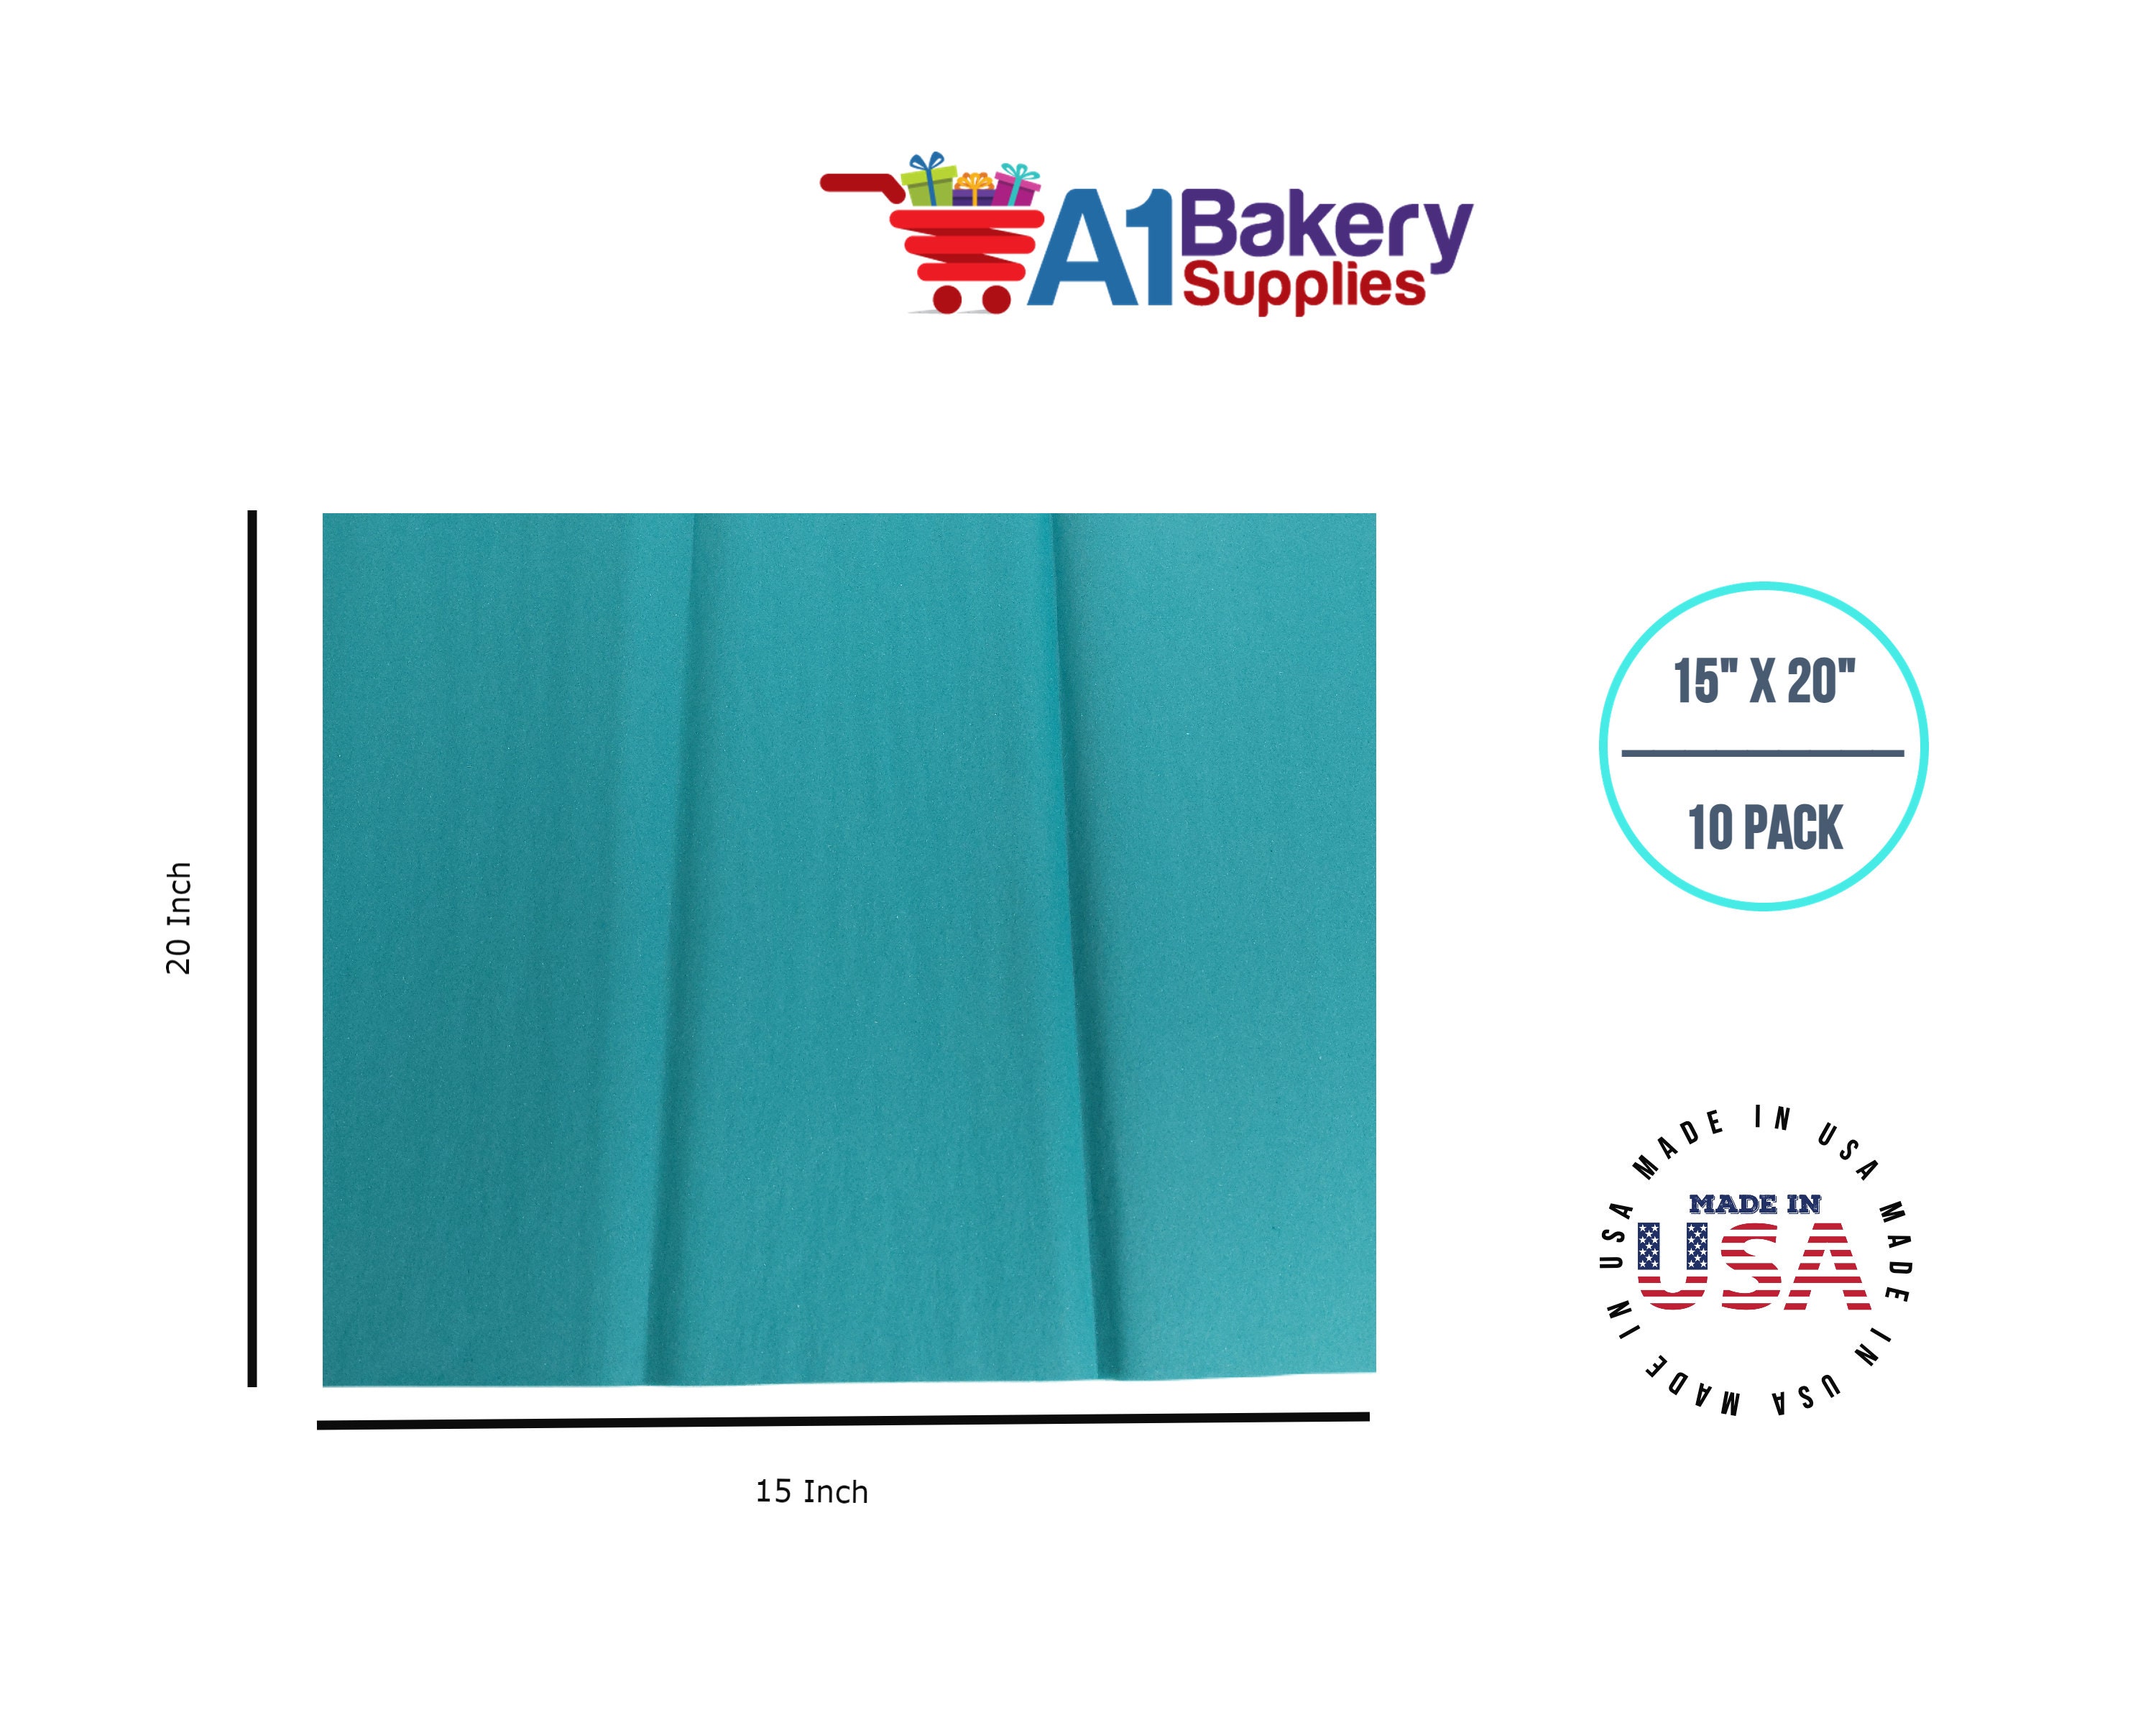  Teal Tissue Paper Squares, Bulk 24 Sheets, Premium Gift Wrap  And Art Supplies For Birthdays, Holidays, Or Presents By , Large 20 Inch X  26 Inch